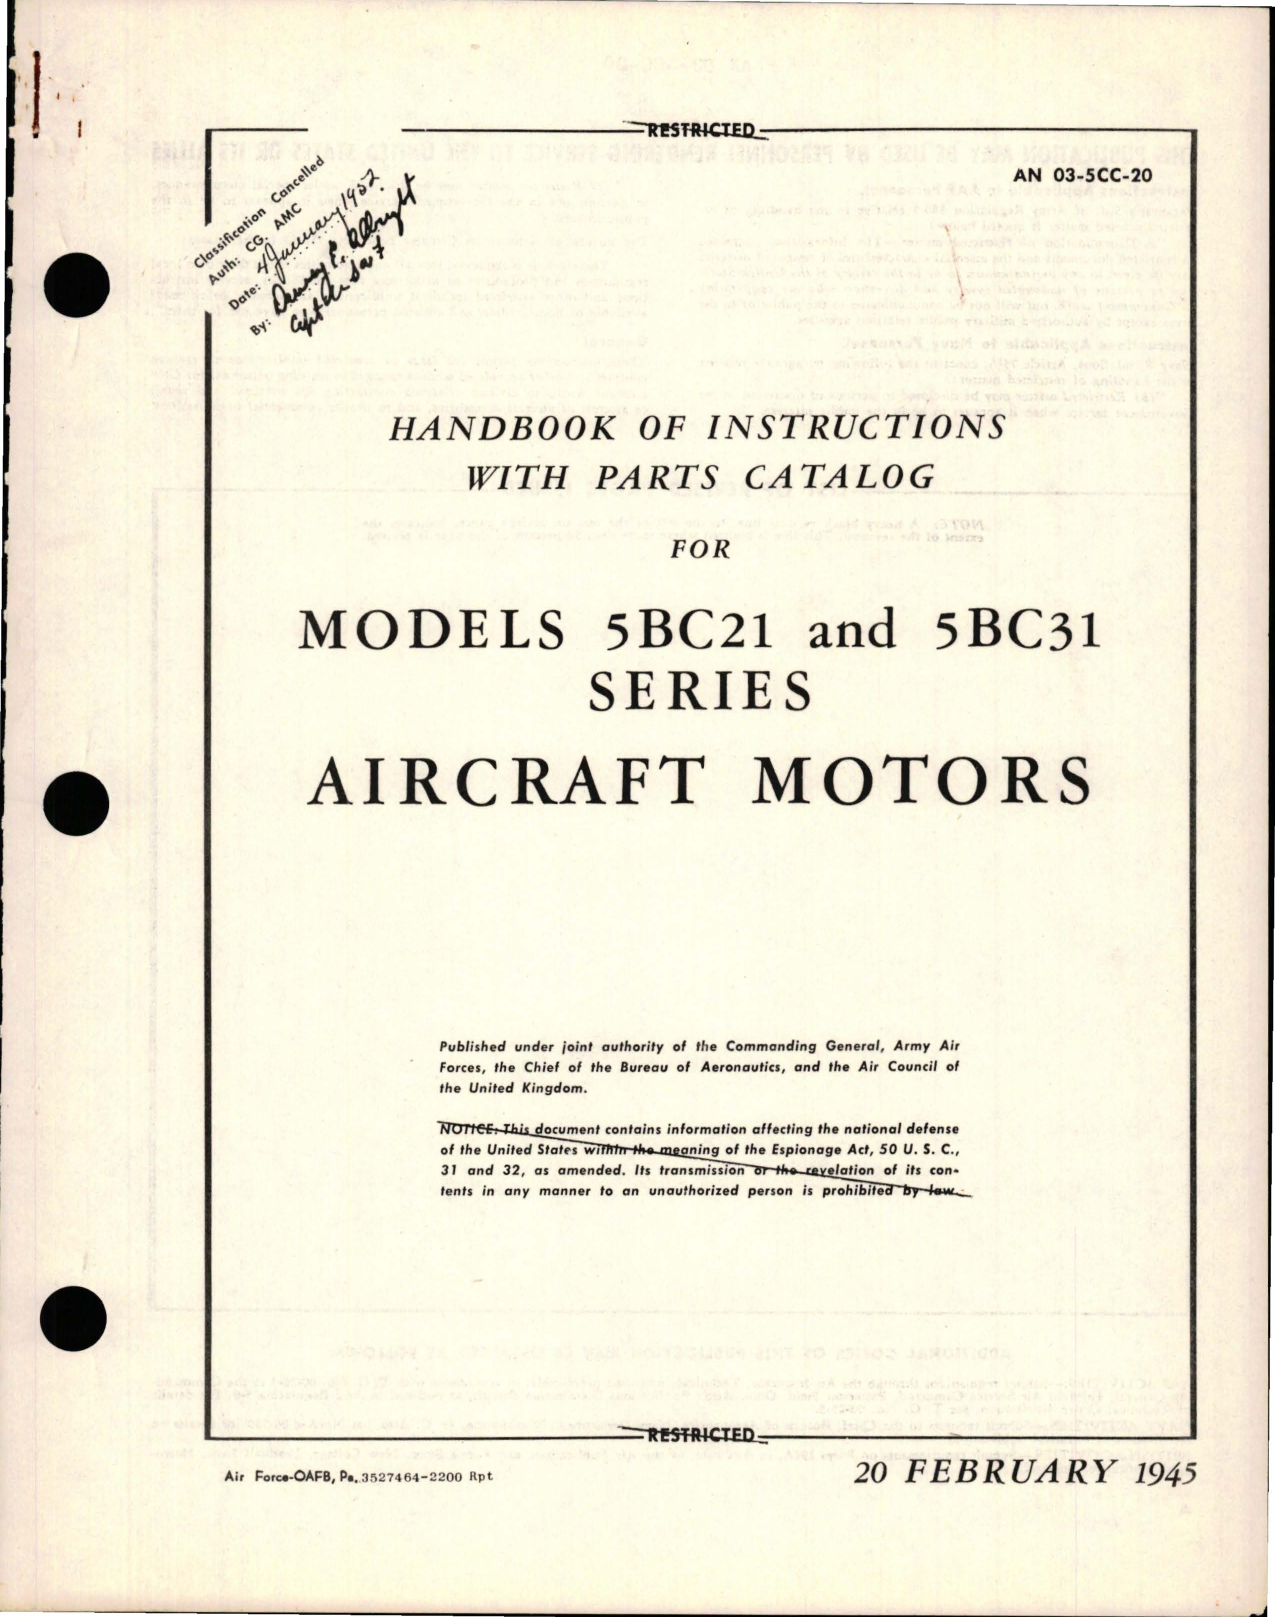 Sample page 1 from AirCorps Library document: Instructions with Parts Catalog for Aircraft Motors - Models 5BC21 and 5BC31 Series 